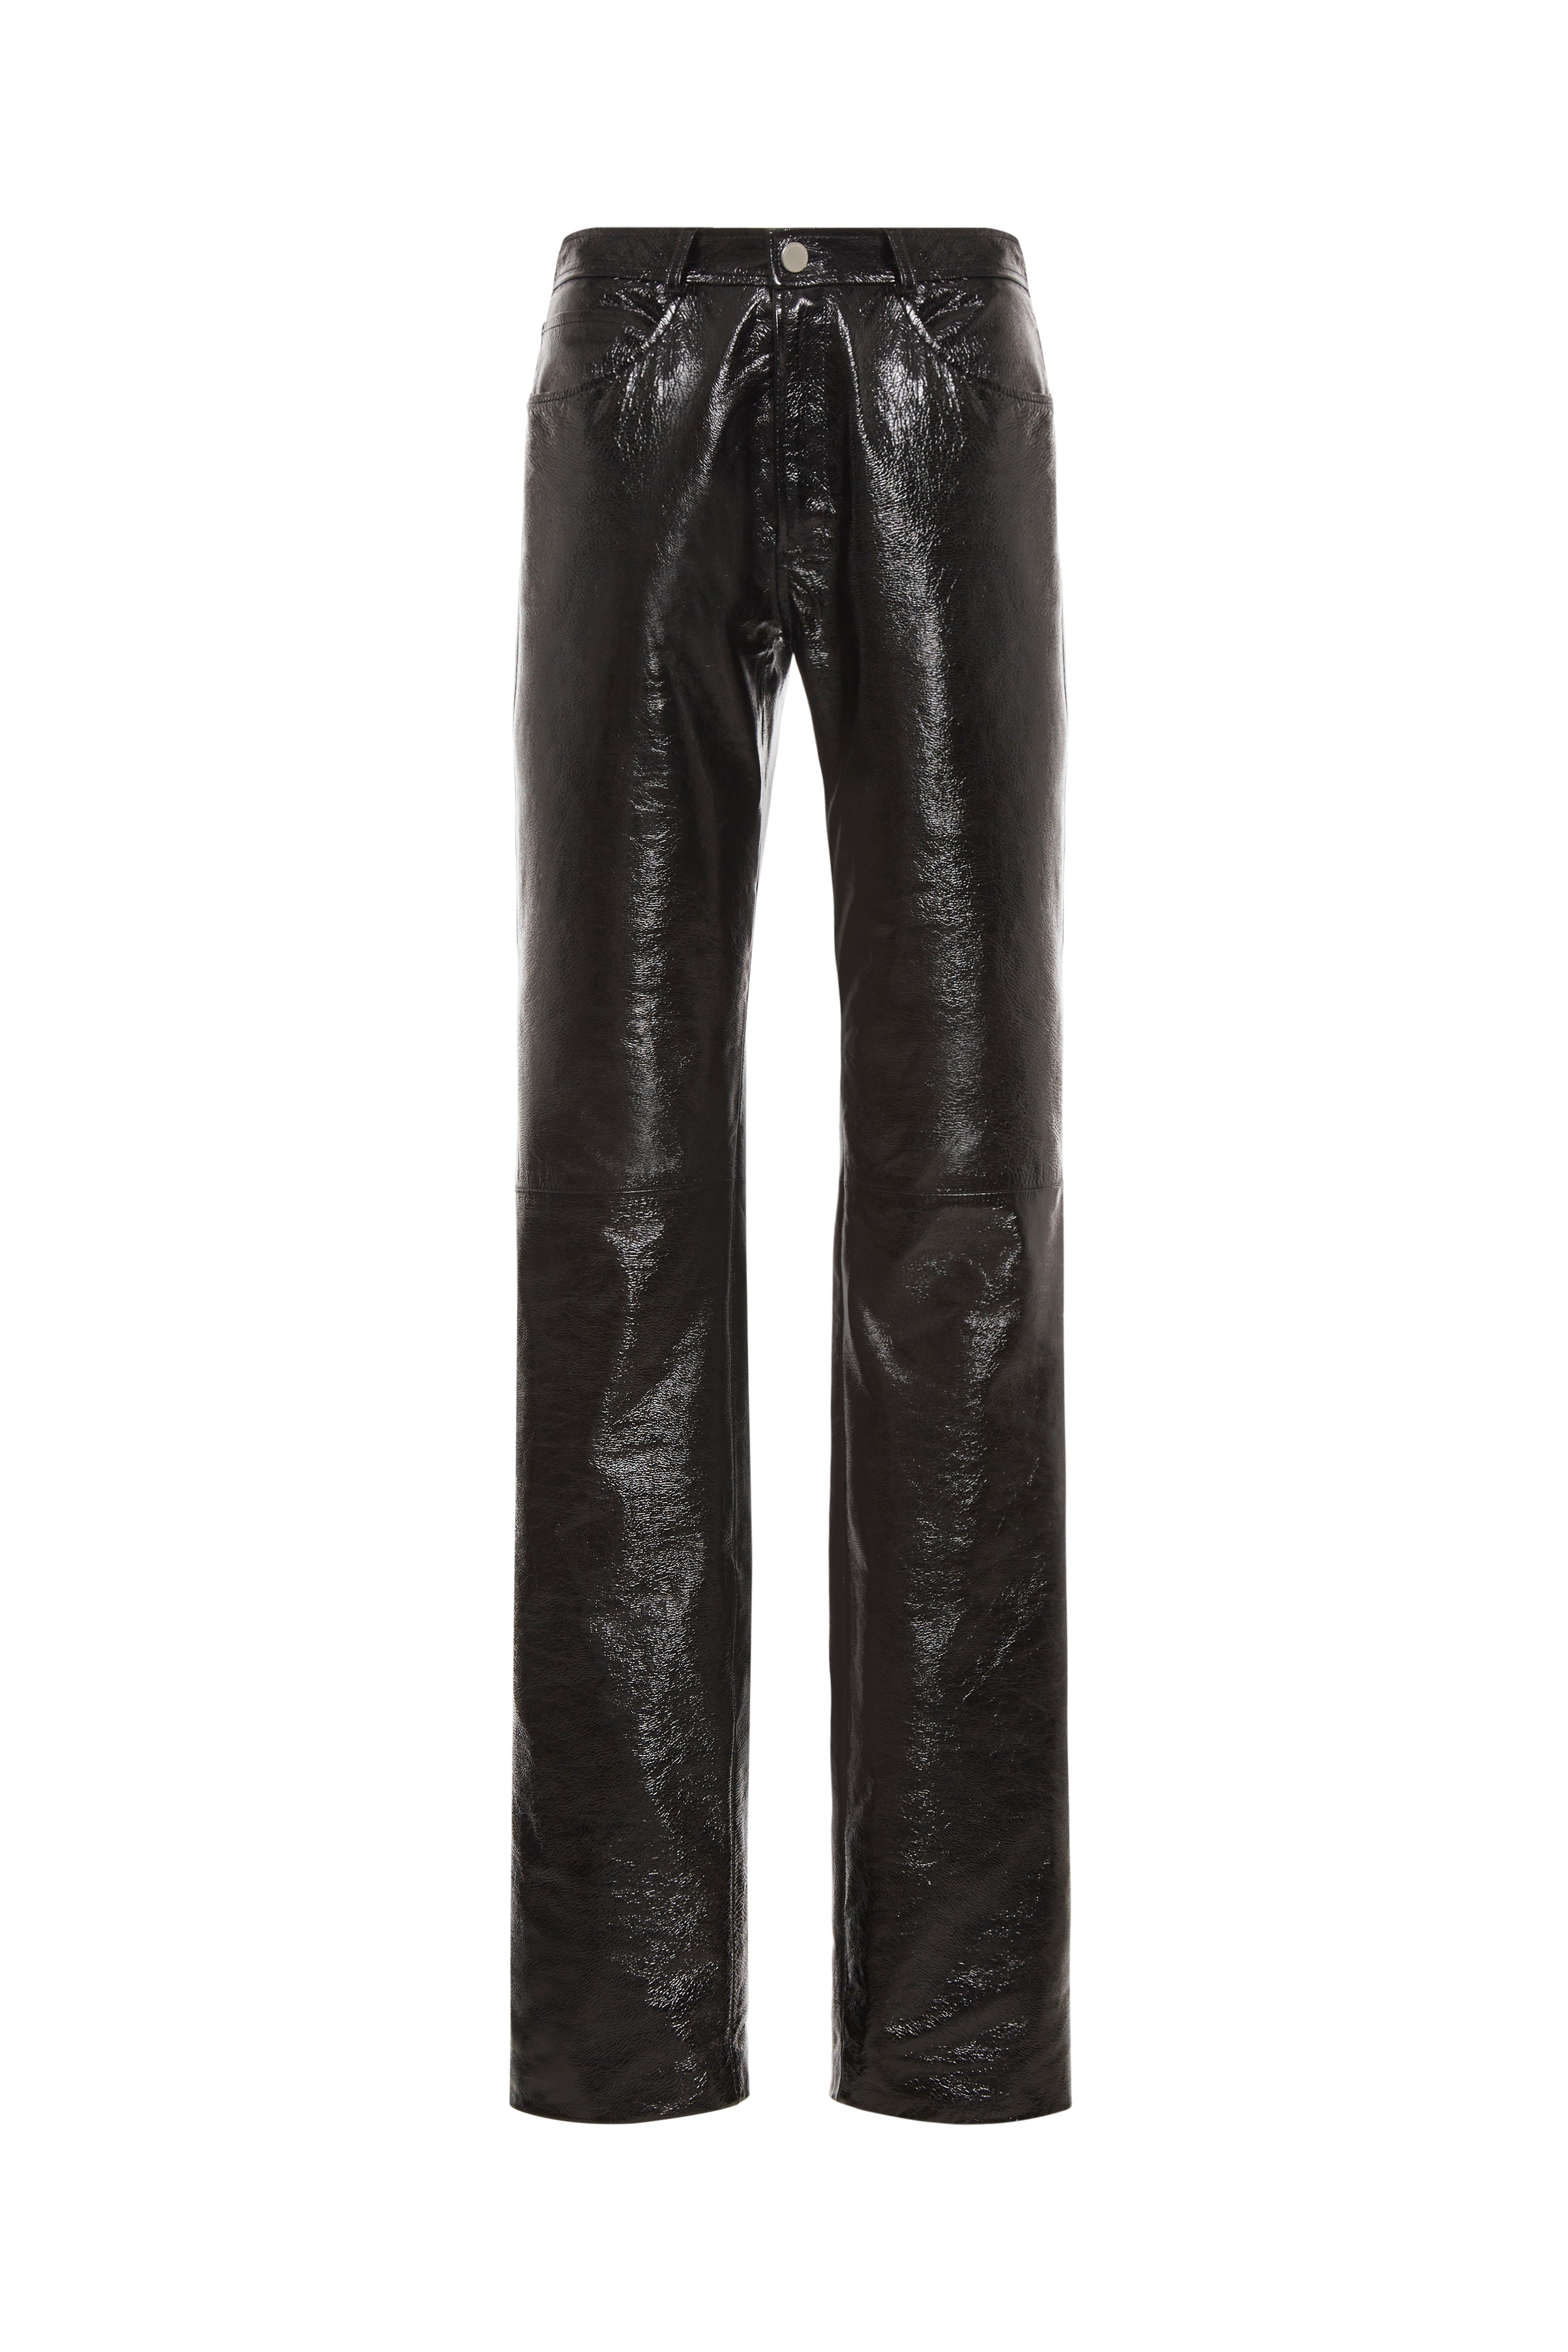 PATENT LEATHER TROUSERS – Alessandra Rich